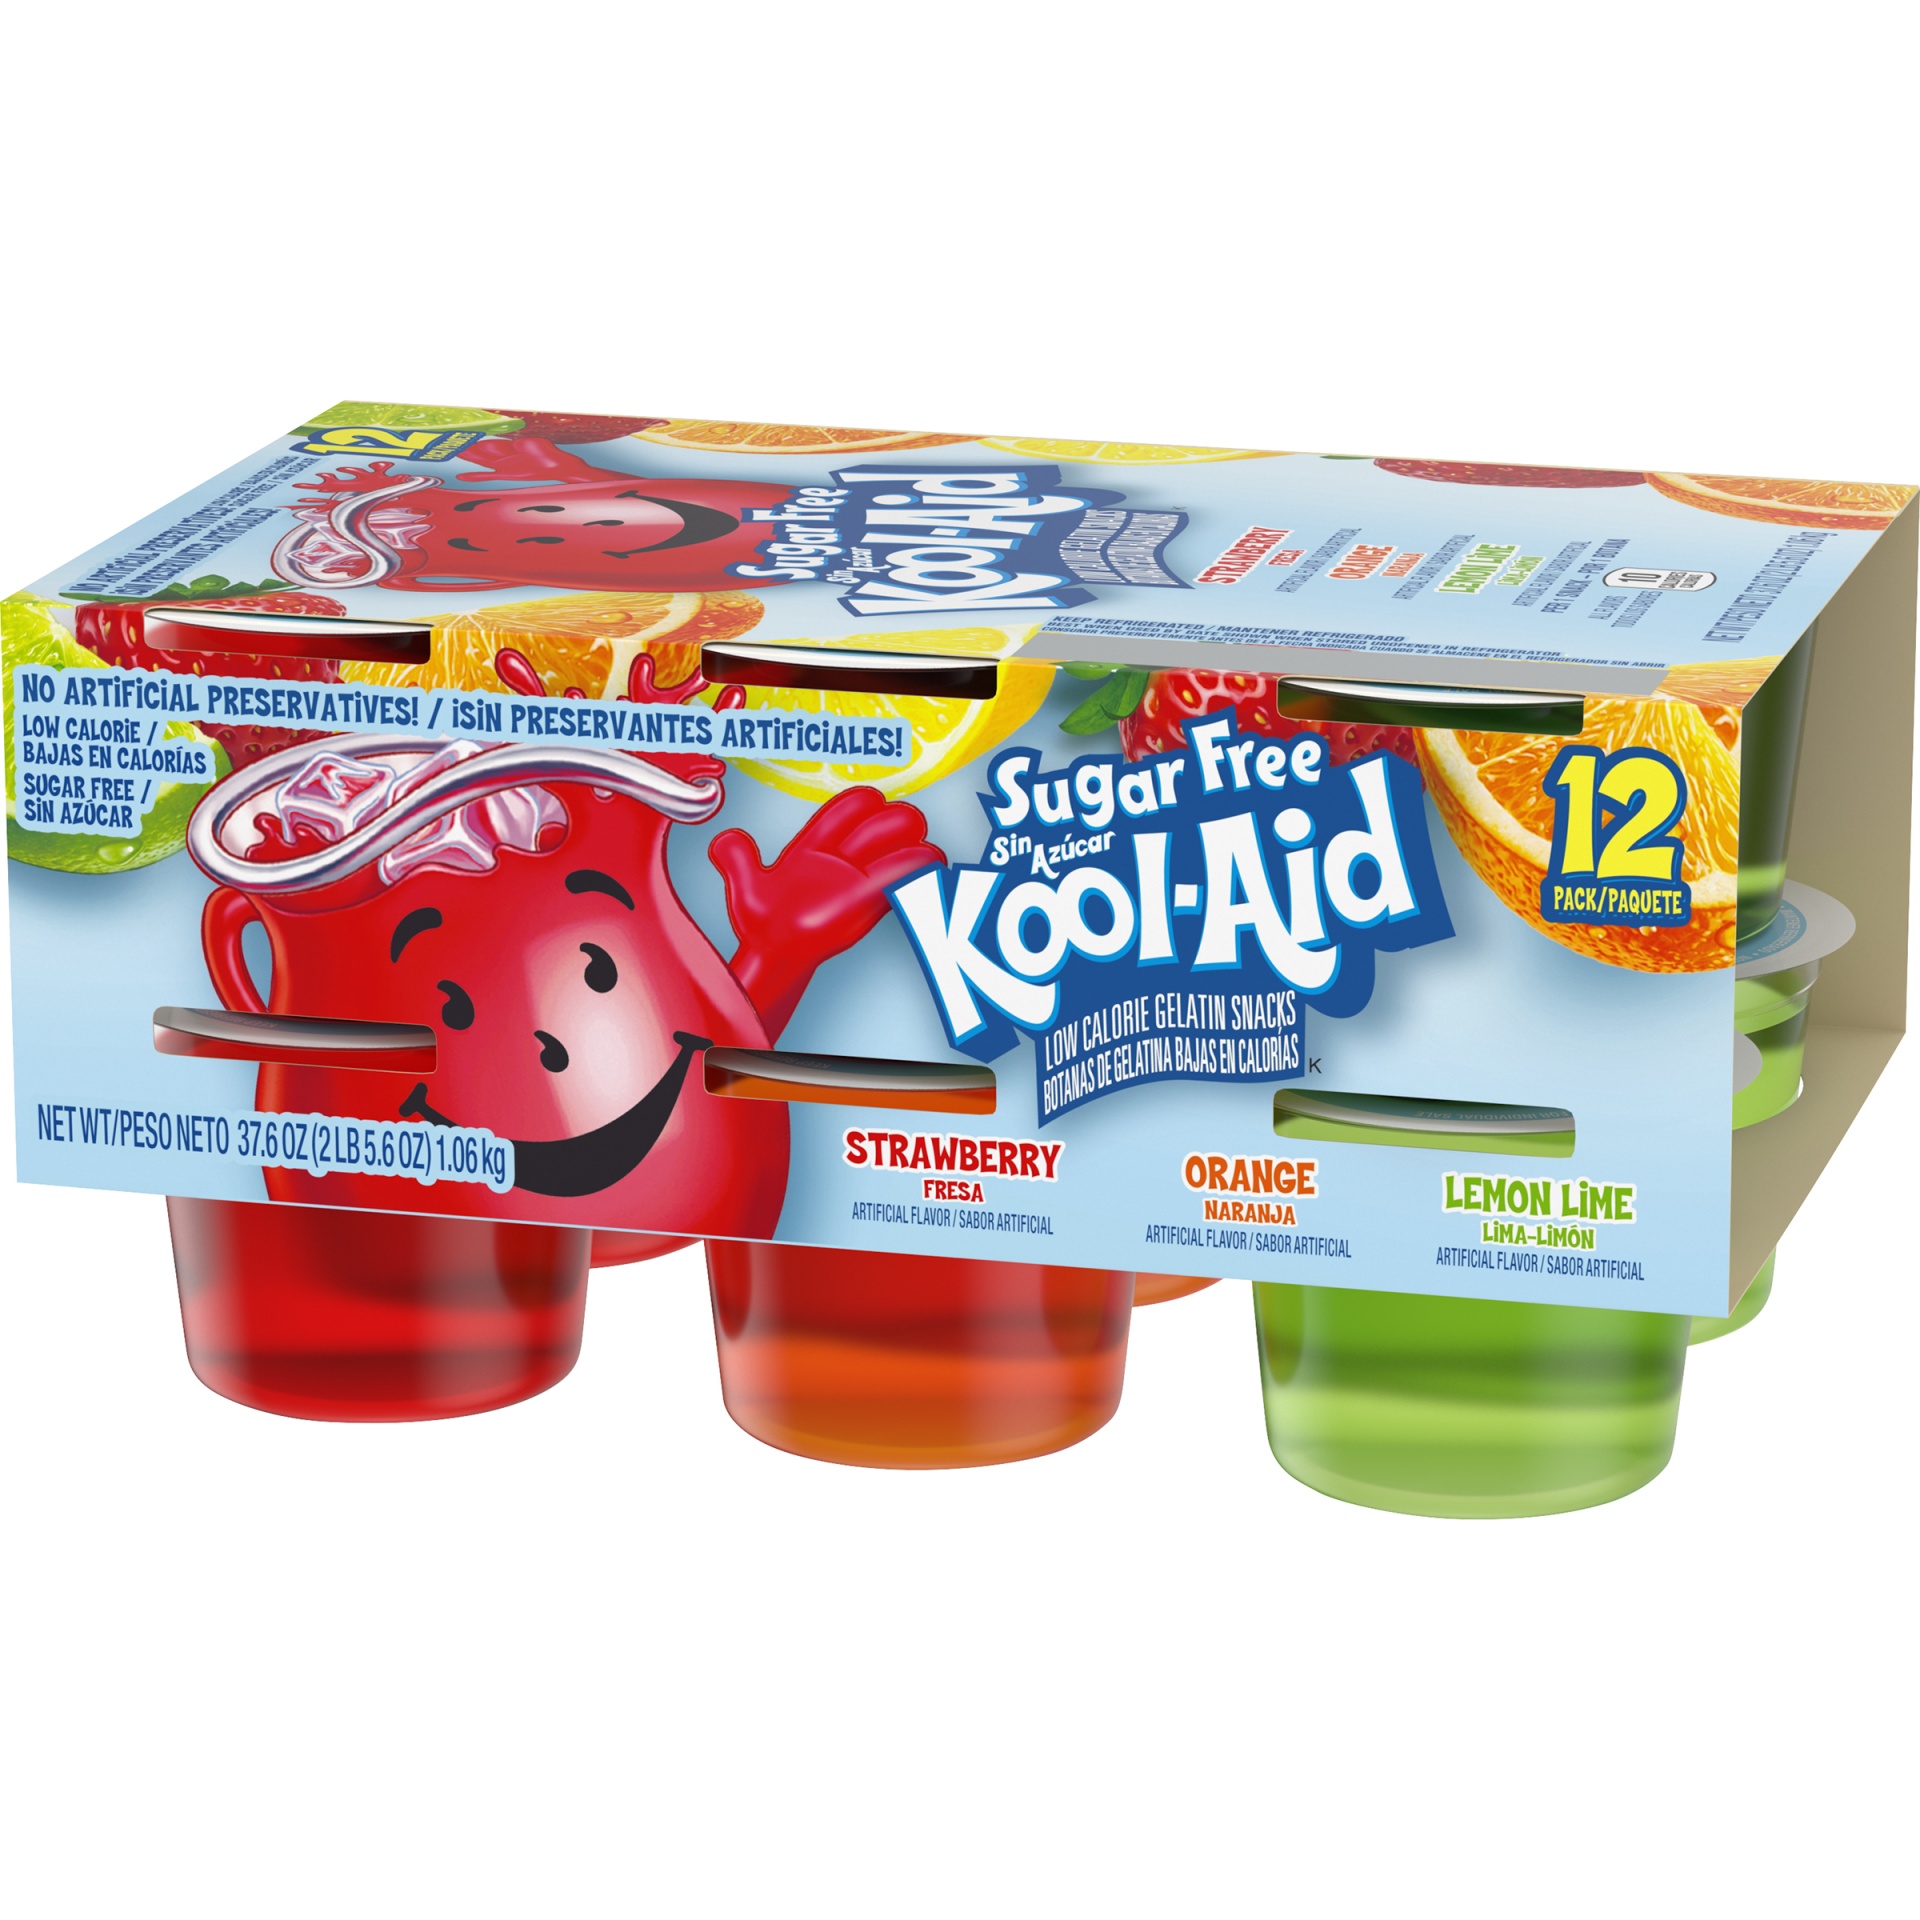 slide 3 of 6, Kool-Aid Strawberry, Orange & Lemon Lime Sugar Free Artificially Flavored Jell-O Ready-to-Eat Jello Cups Gelatin Snack Variety Pack Cups, 37.6 oz